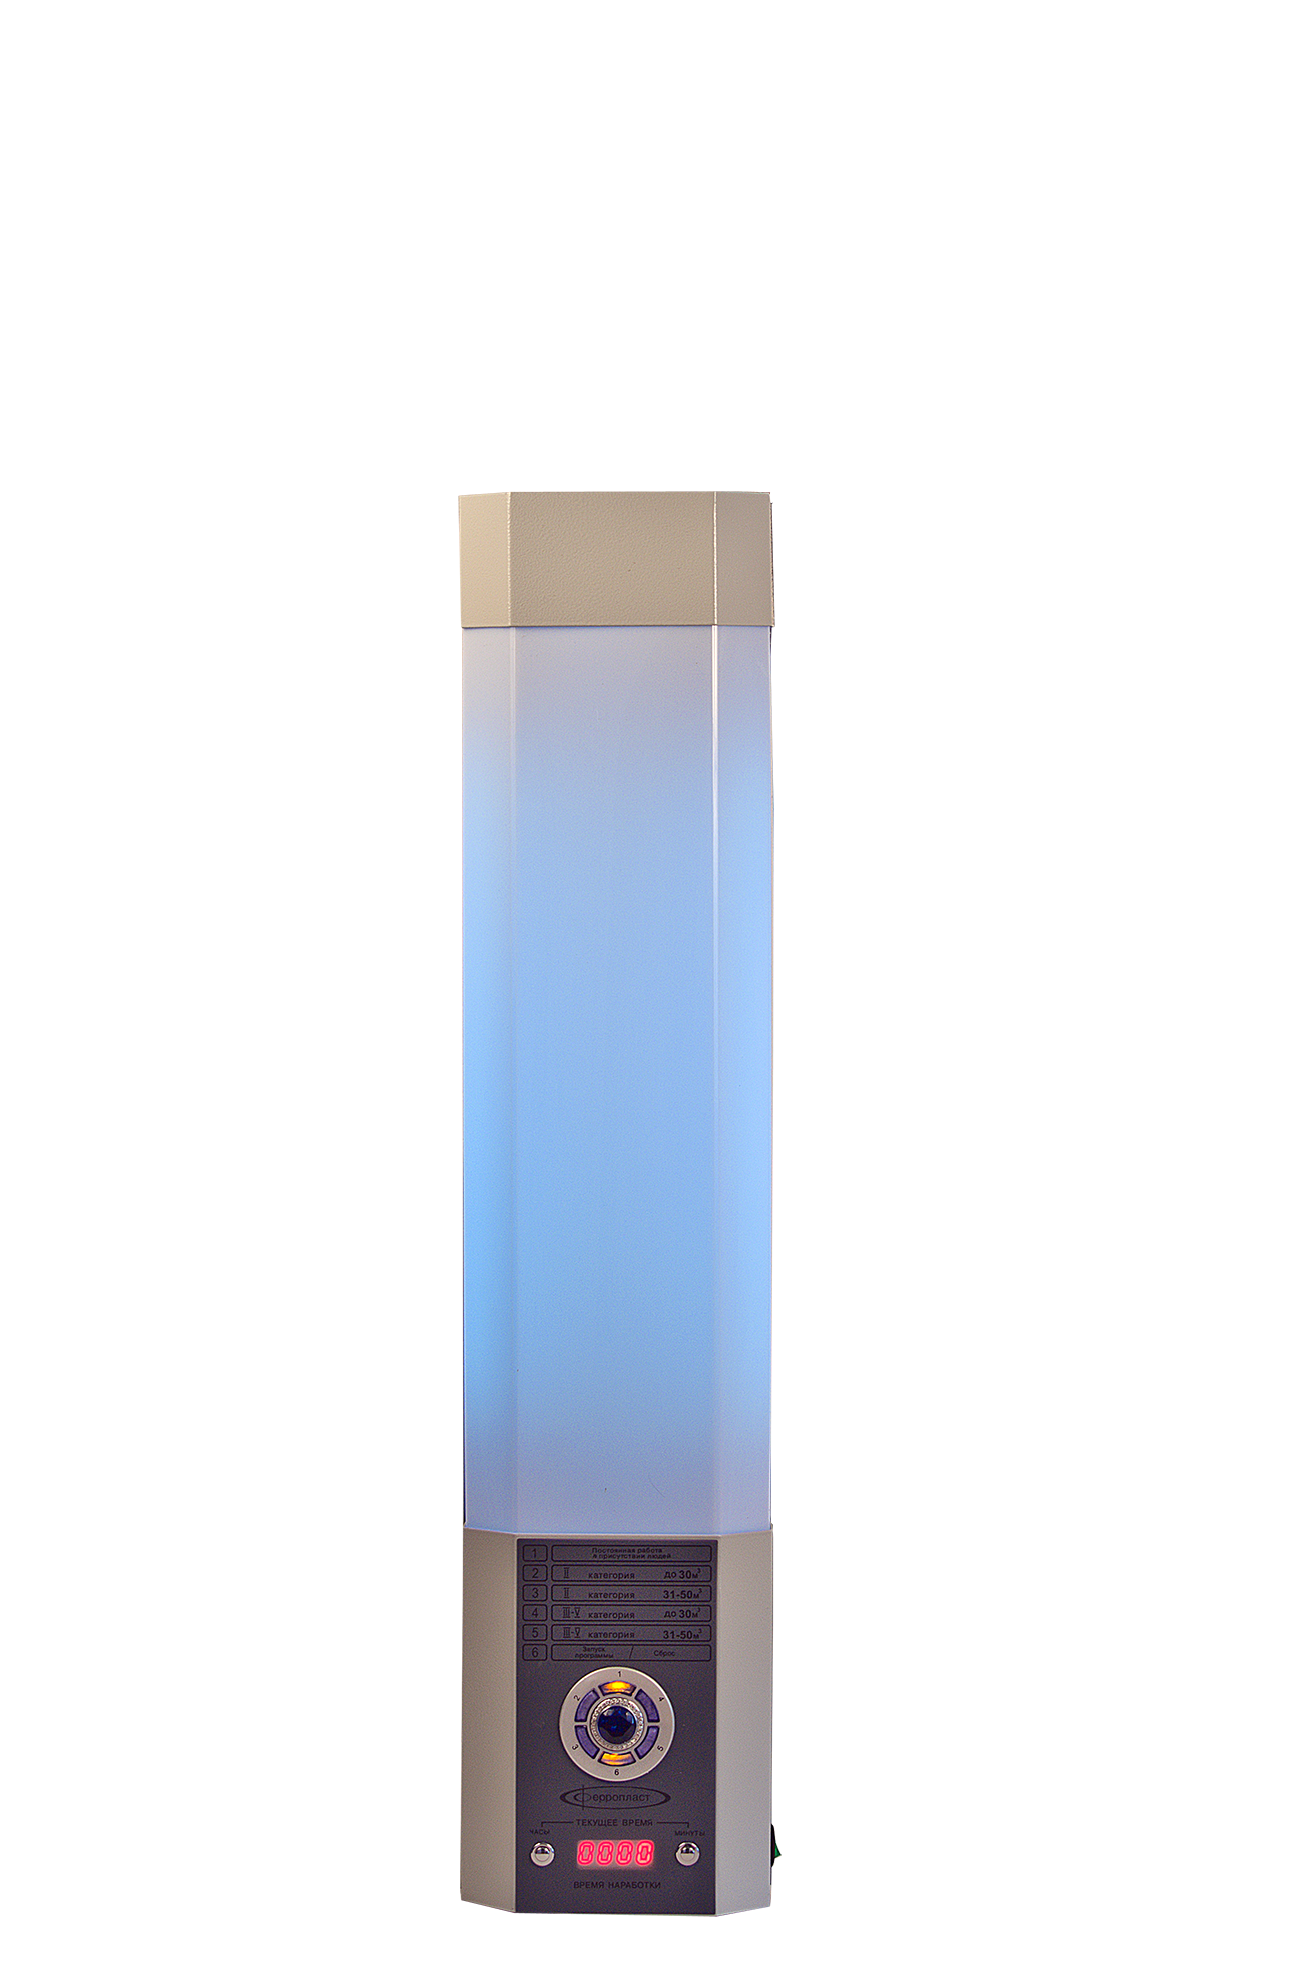 UV bactericidal recirculator with two lamps and forced circulation of air flow for disinfection of indoor air in presence of people – 2S